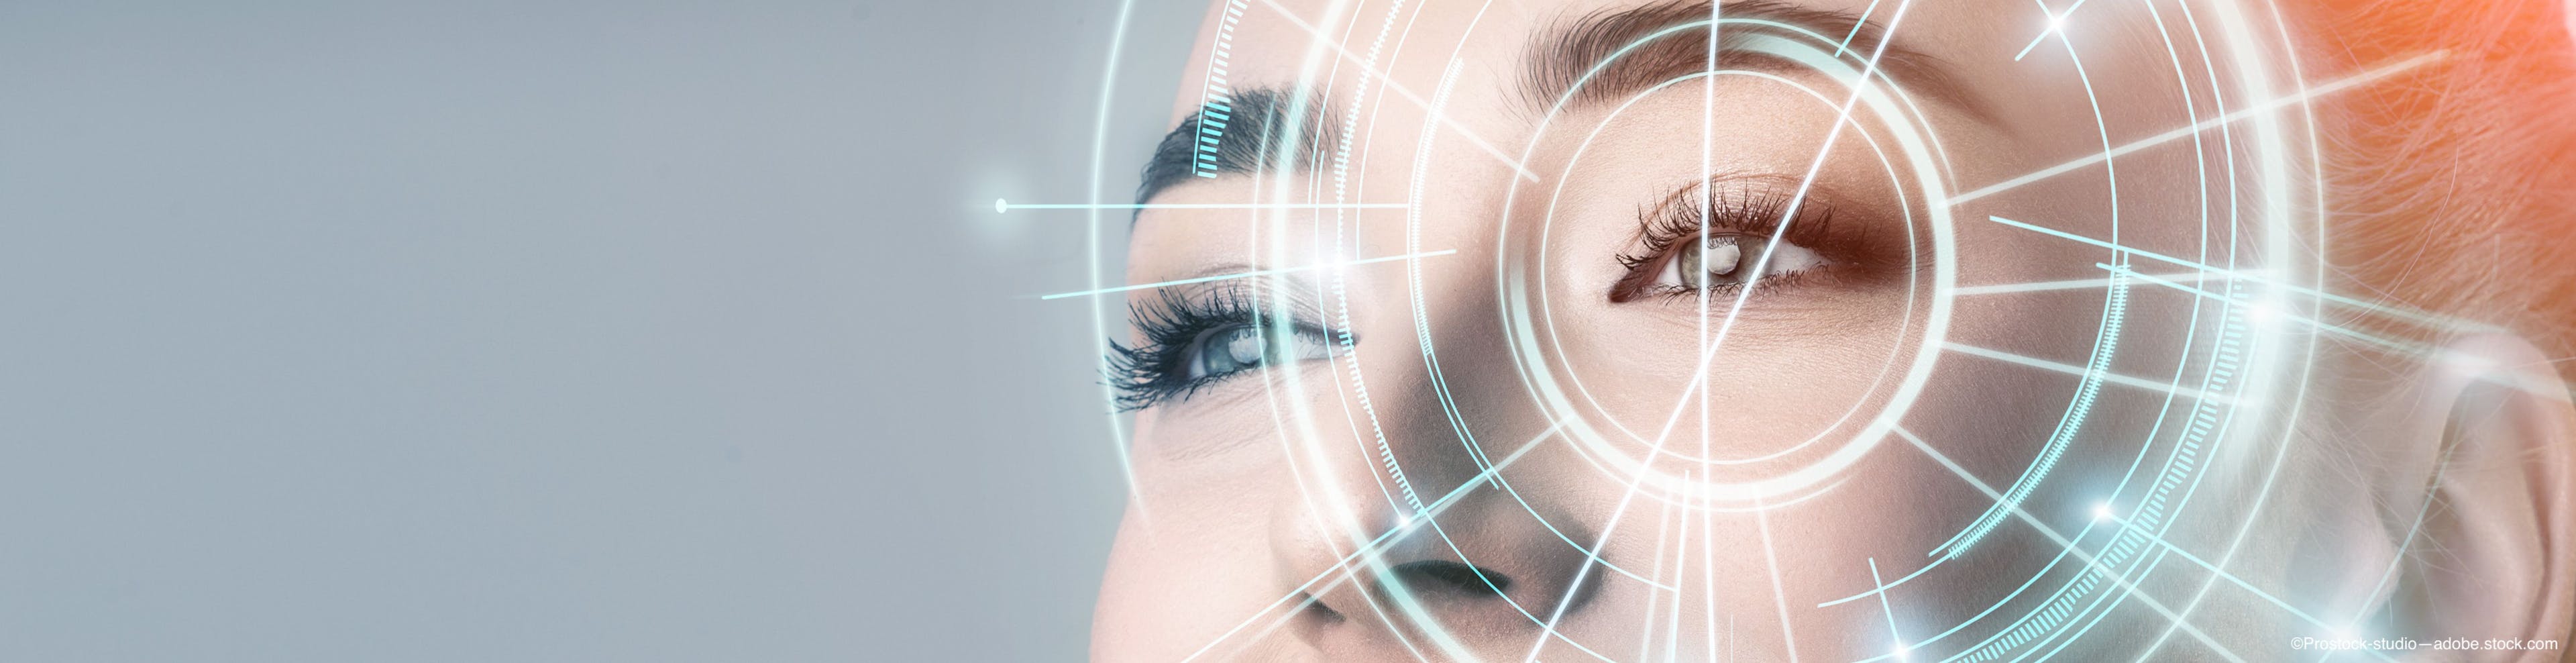 Ophthalmology: A pioneer in the field of artificial intelligence